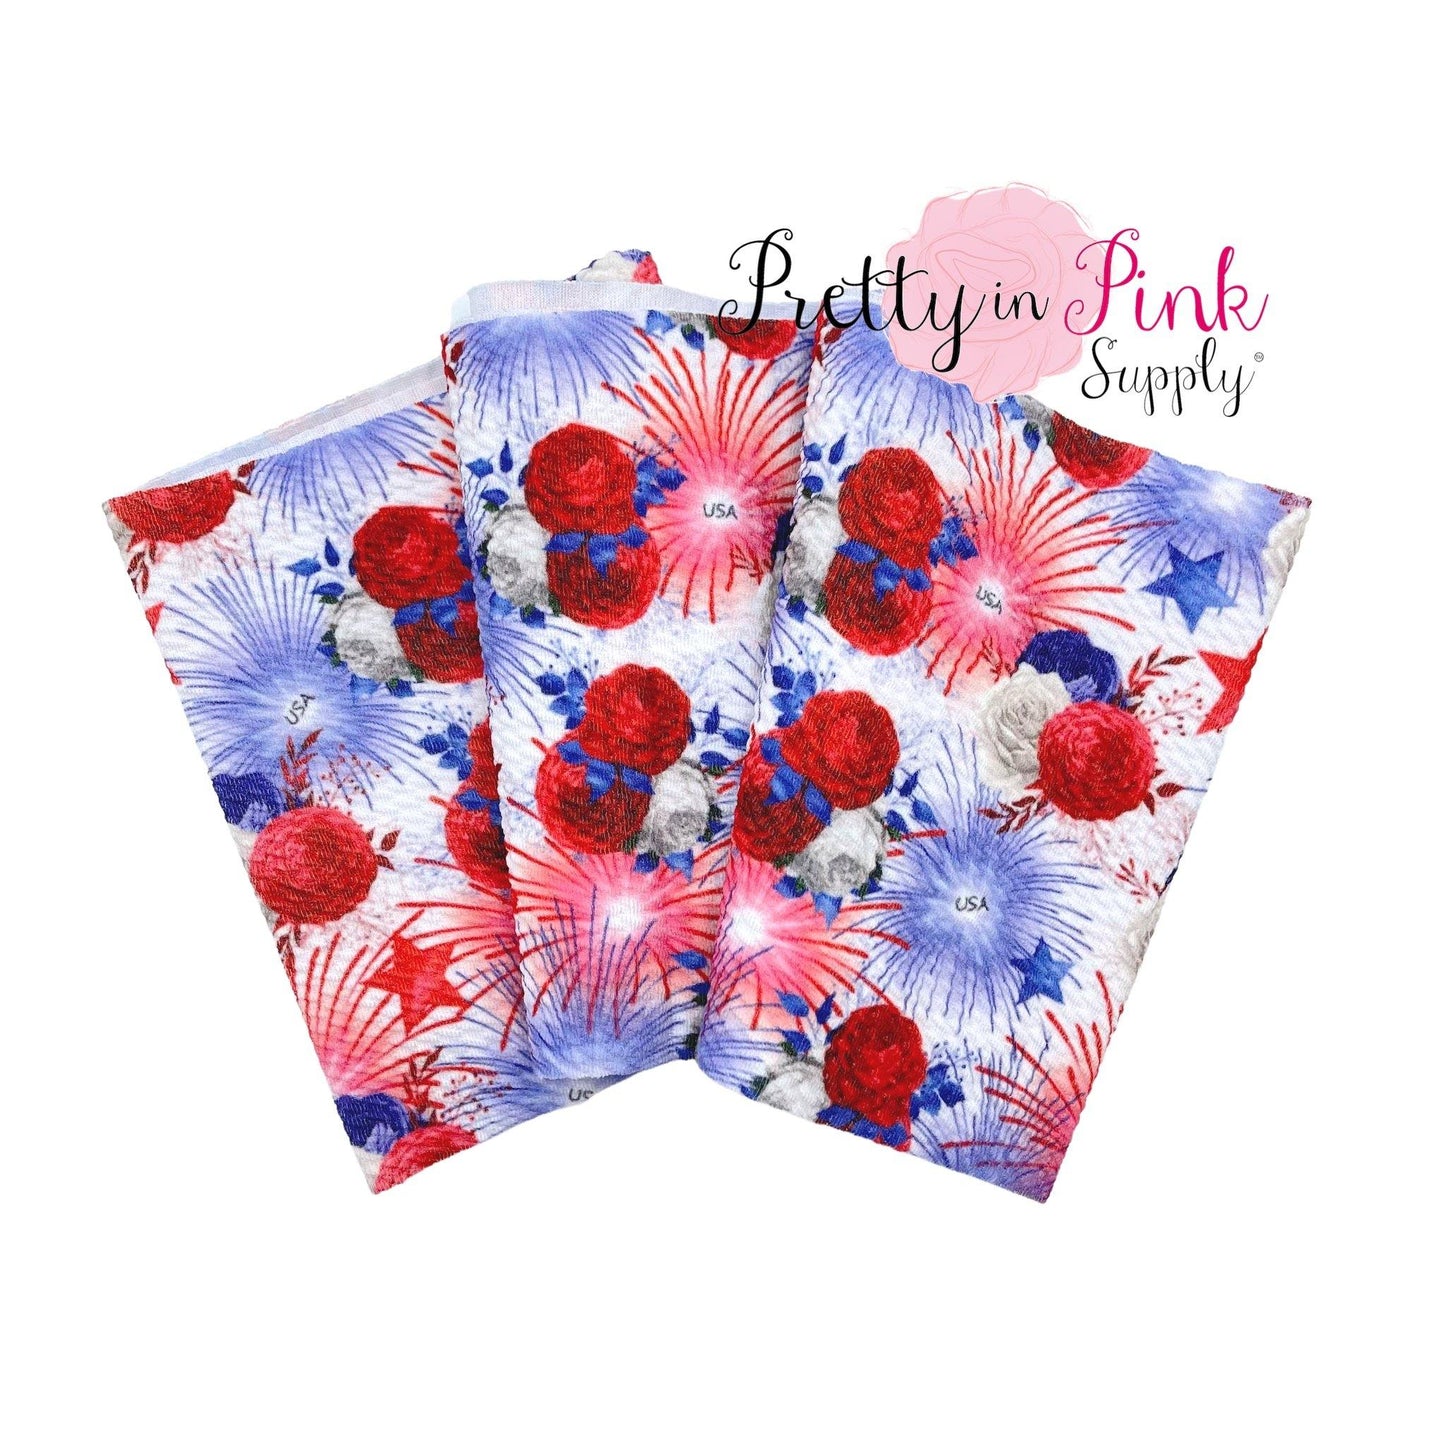 Party In The USA | Liverpool Fabric - Pretty in Pink Supply